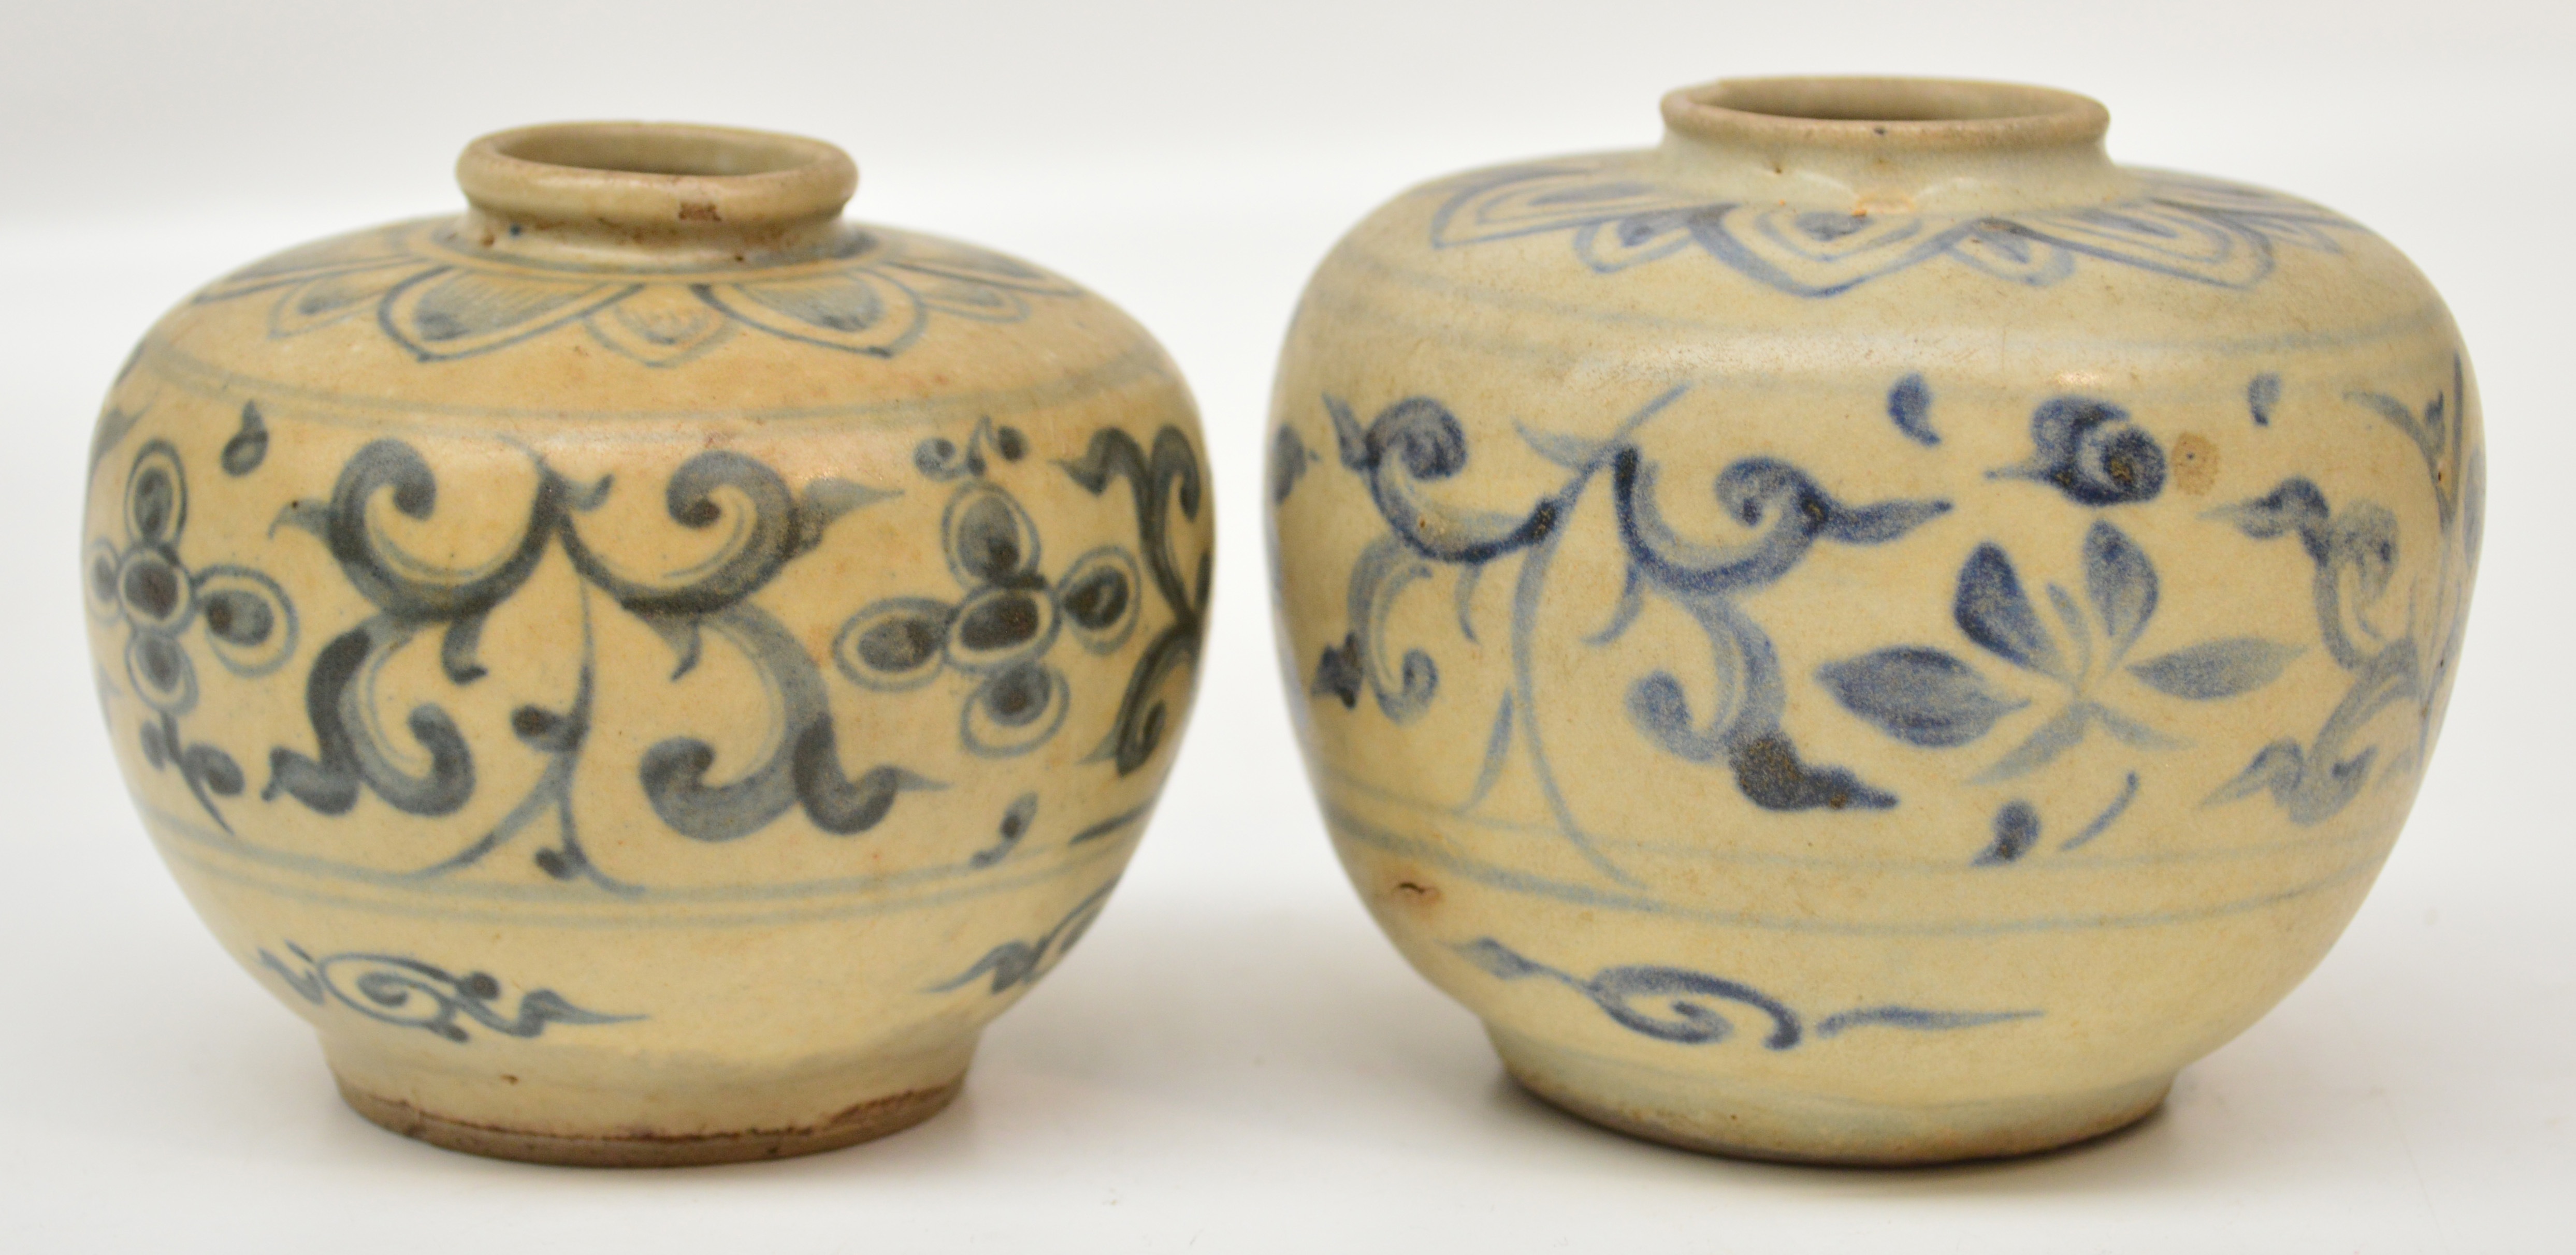 Two 15th century Anamese jars excavated from the Hoi An shipwreck, both painted in underglaze blue